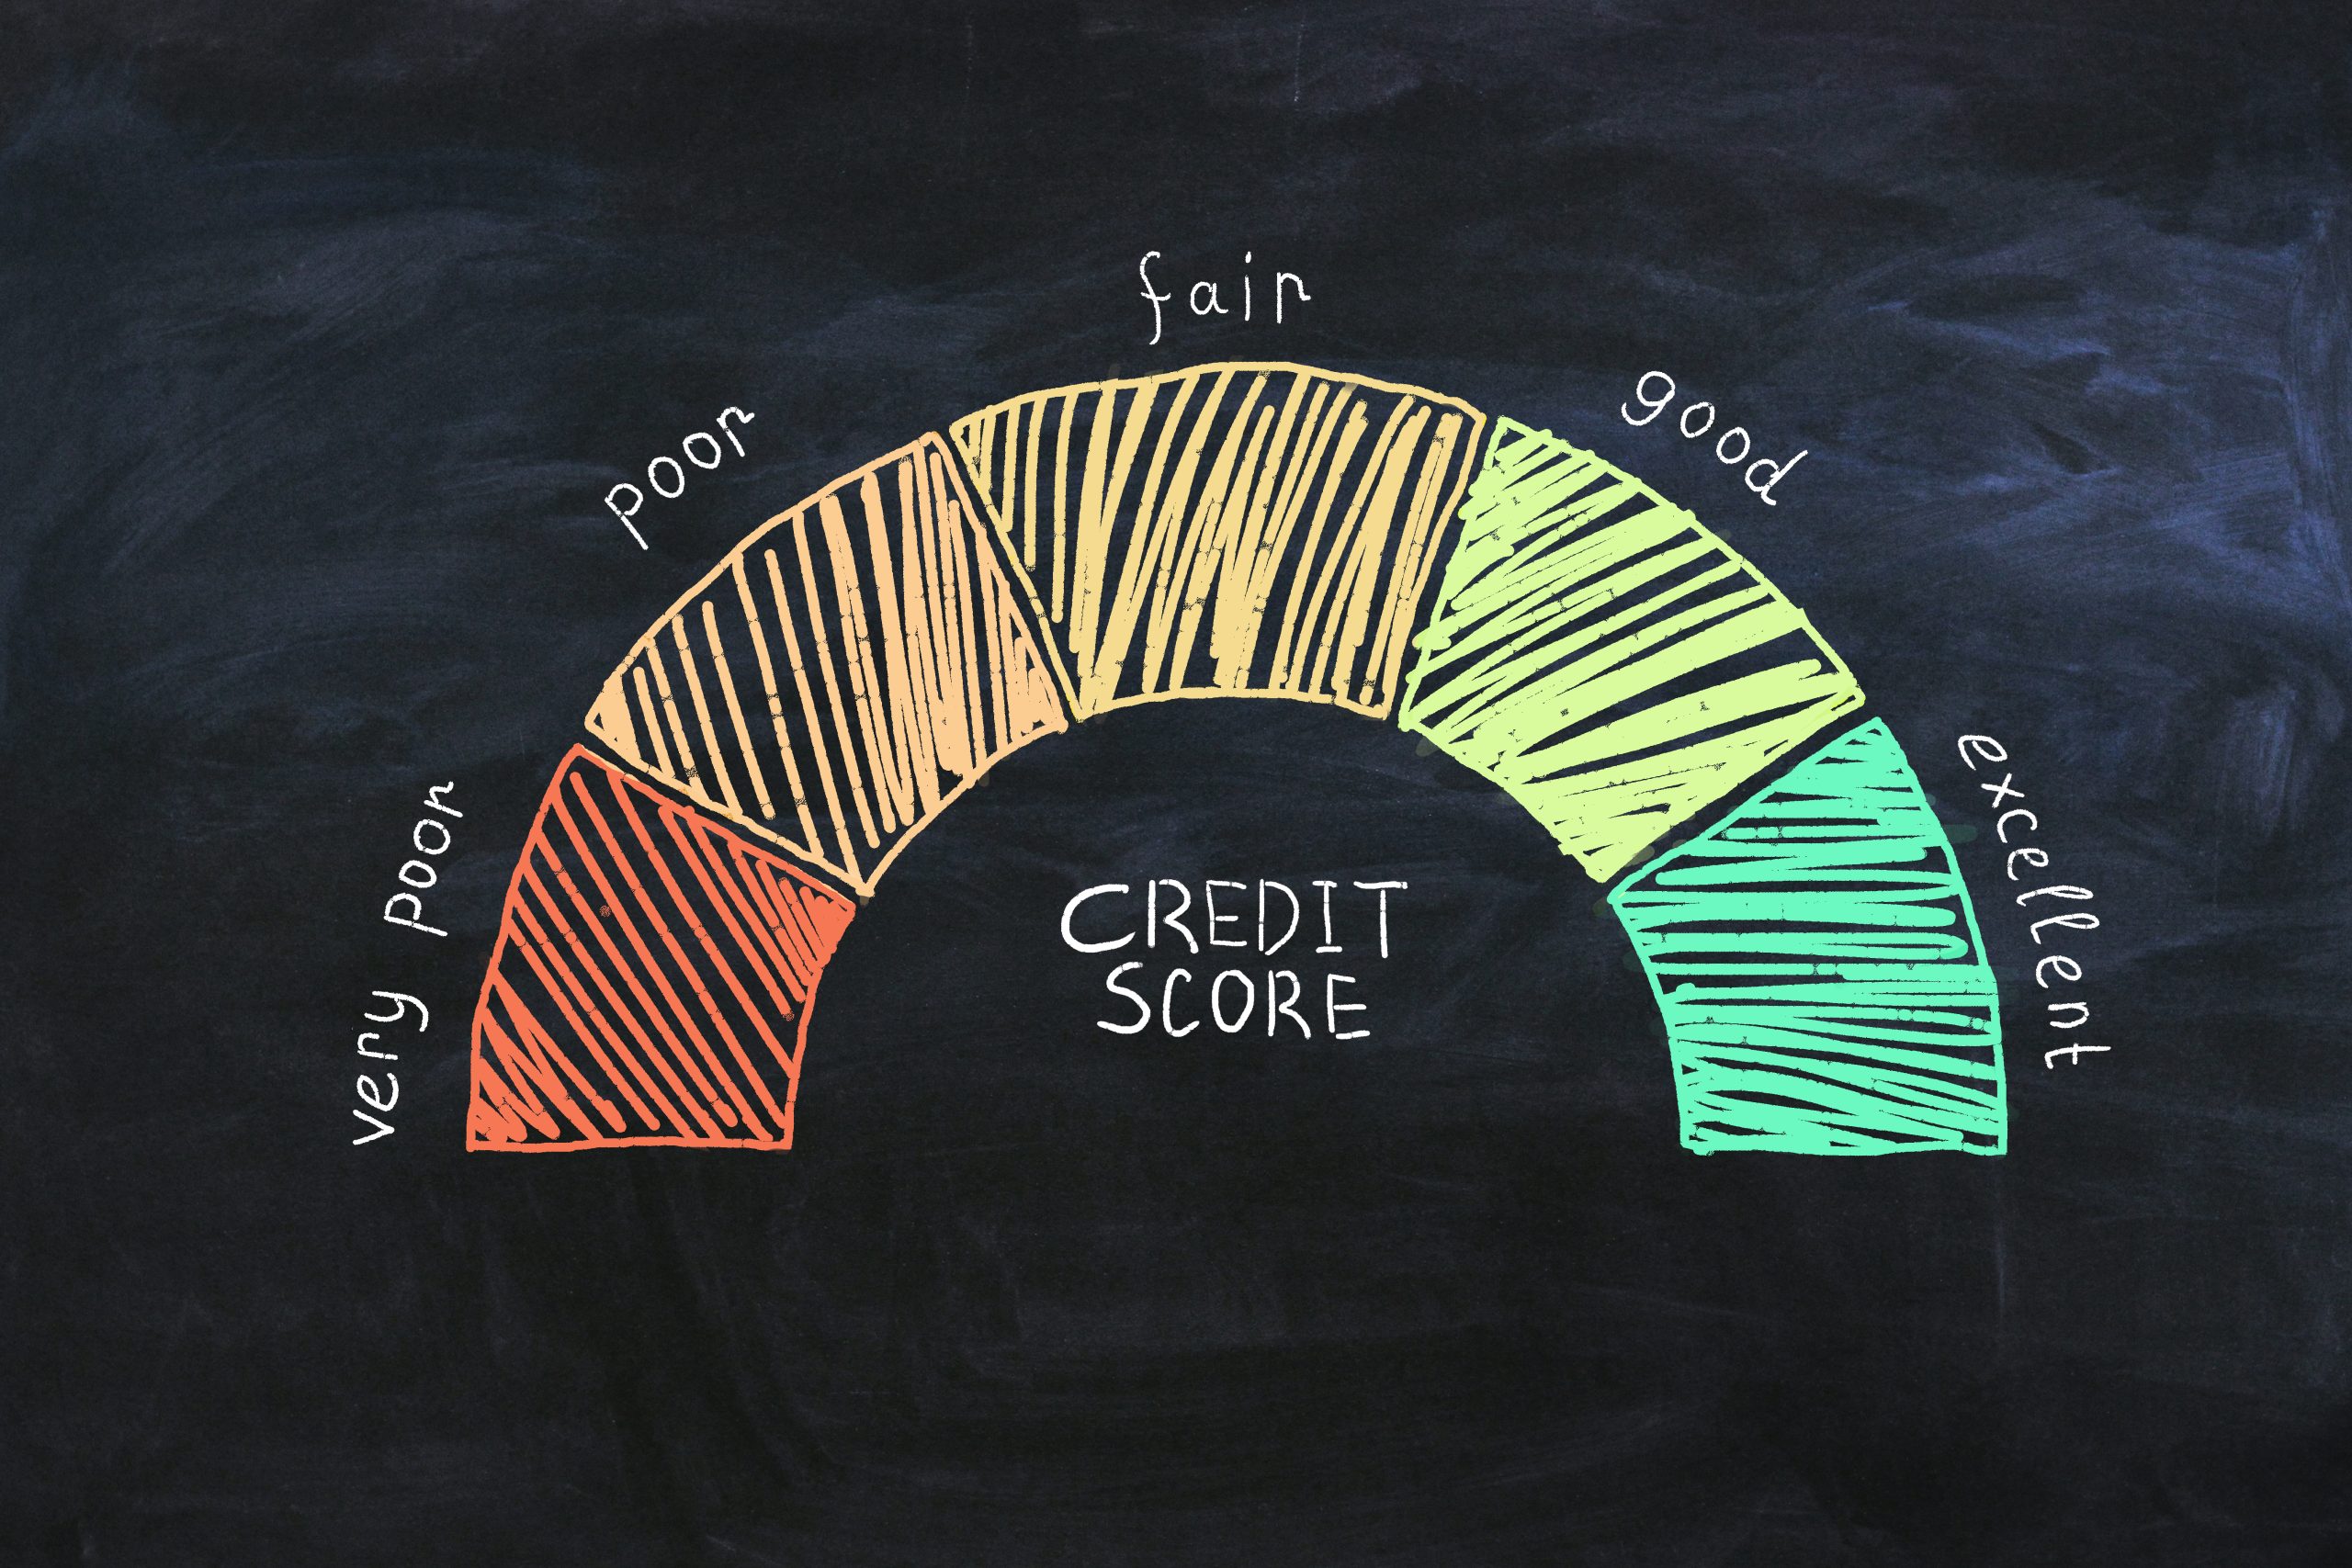 Credit score concept with wealth scale from very poor to excellent on abstract dark background.